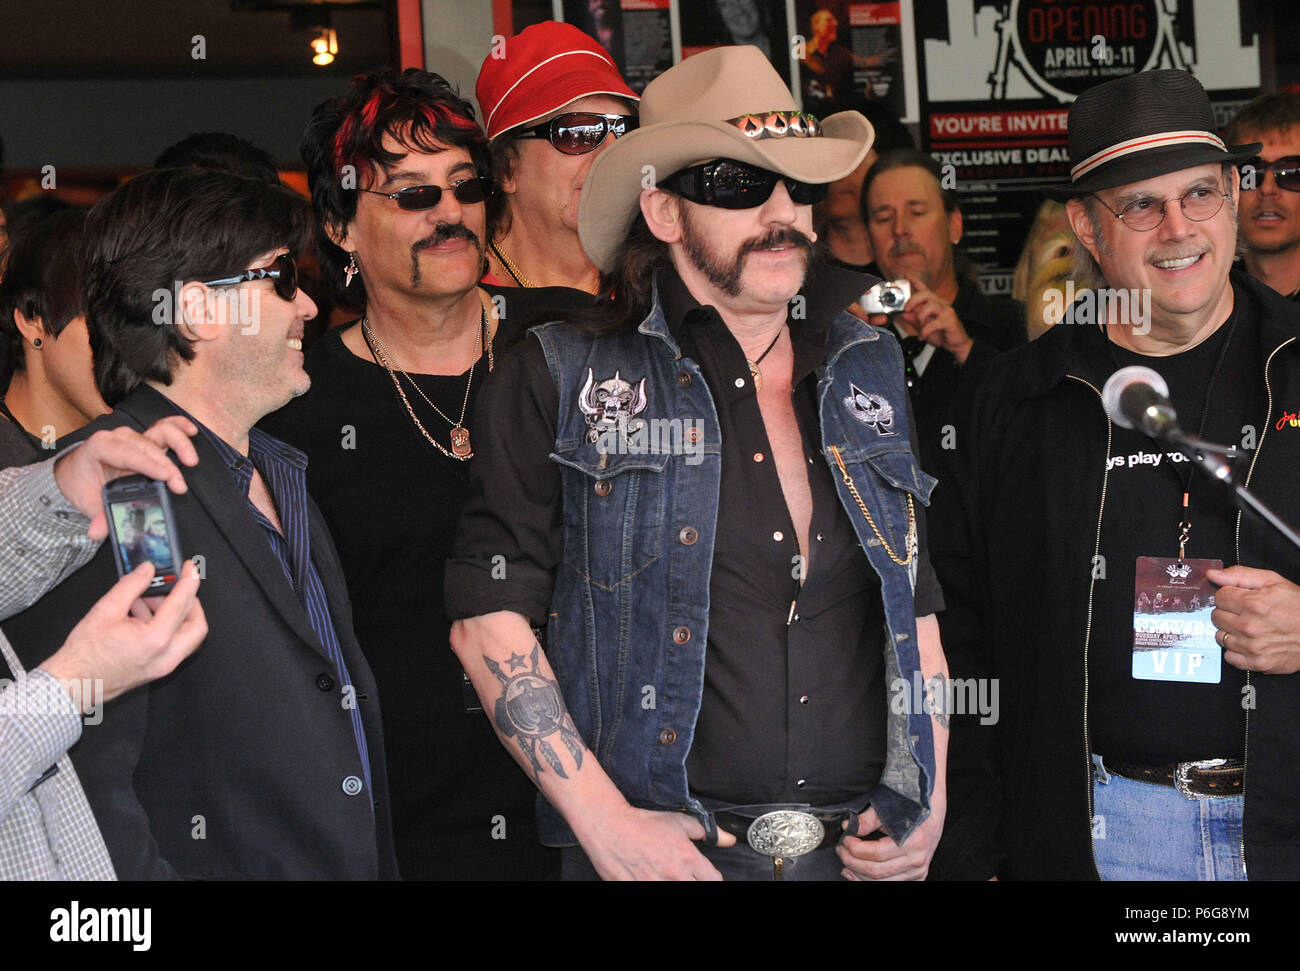 Carmine Appice   Lemmy Kilmister  32   - Rudolf Schenker, Klaus Meine, Matthias Jabs, James Kottak and Pawel Maciwoda of the Scorpions will be inducted into HollywoodÕs RockWalk at the guitar Center In Los Angeles.Carmine Appice   Lemmy Kilmister  32  Event in Hollywood Life - California, Red Carpet Event, USA, Film Industry, Celebrities, Photography, Bestof, Arts Culture and Entertainment, Topix Celebrities fashion, Best of, Hollywood Life, Event in Hollywood Life - California, Red Carpet and backstage, ,Arts Culture and Entertainment, Photography,    inquiry tsuni@Gamma-USA.com ,  Music cele Stock Photo